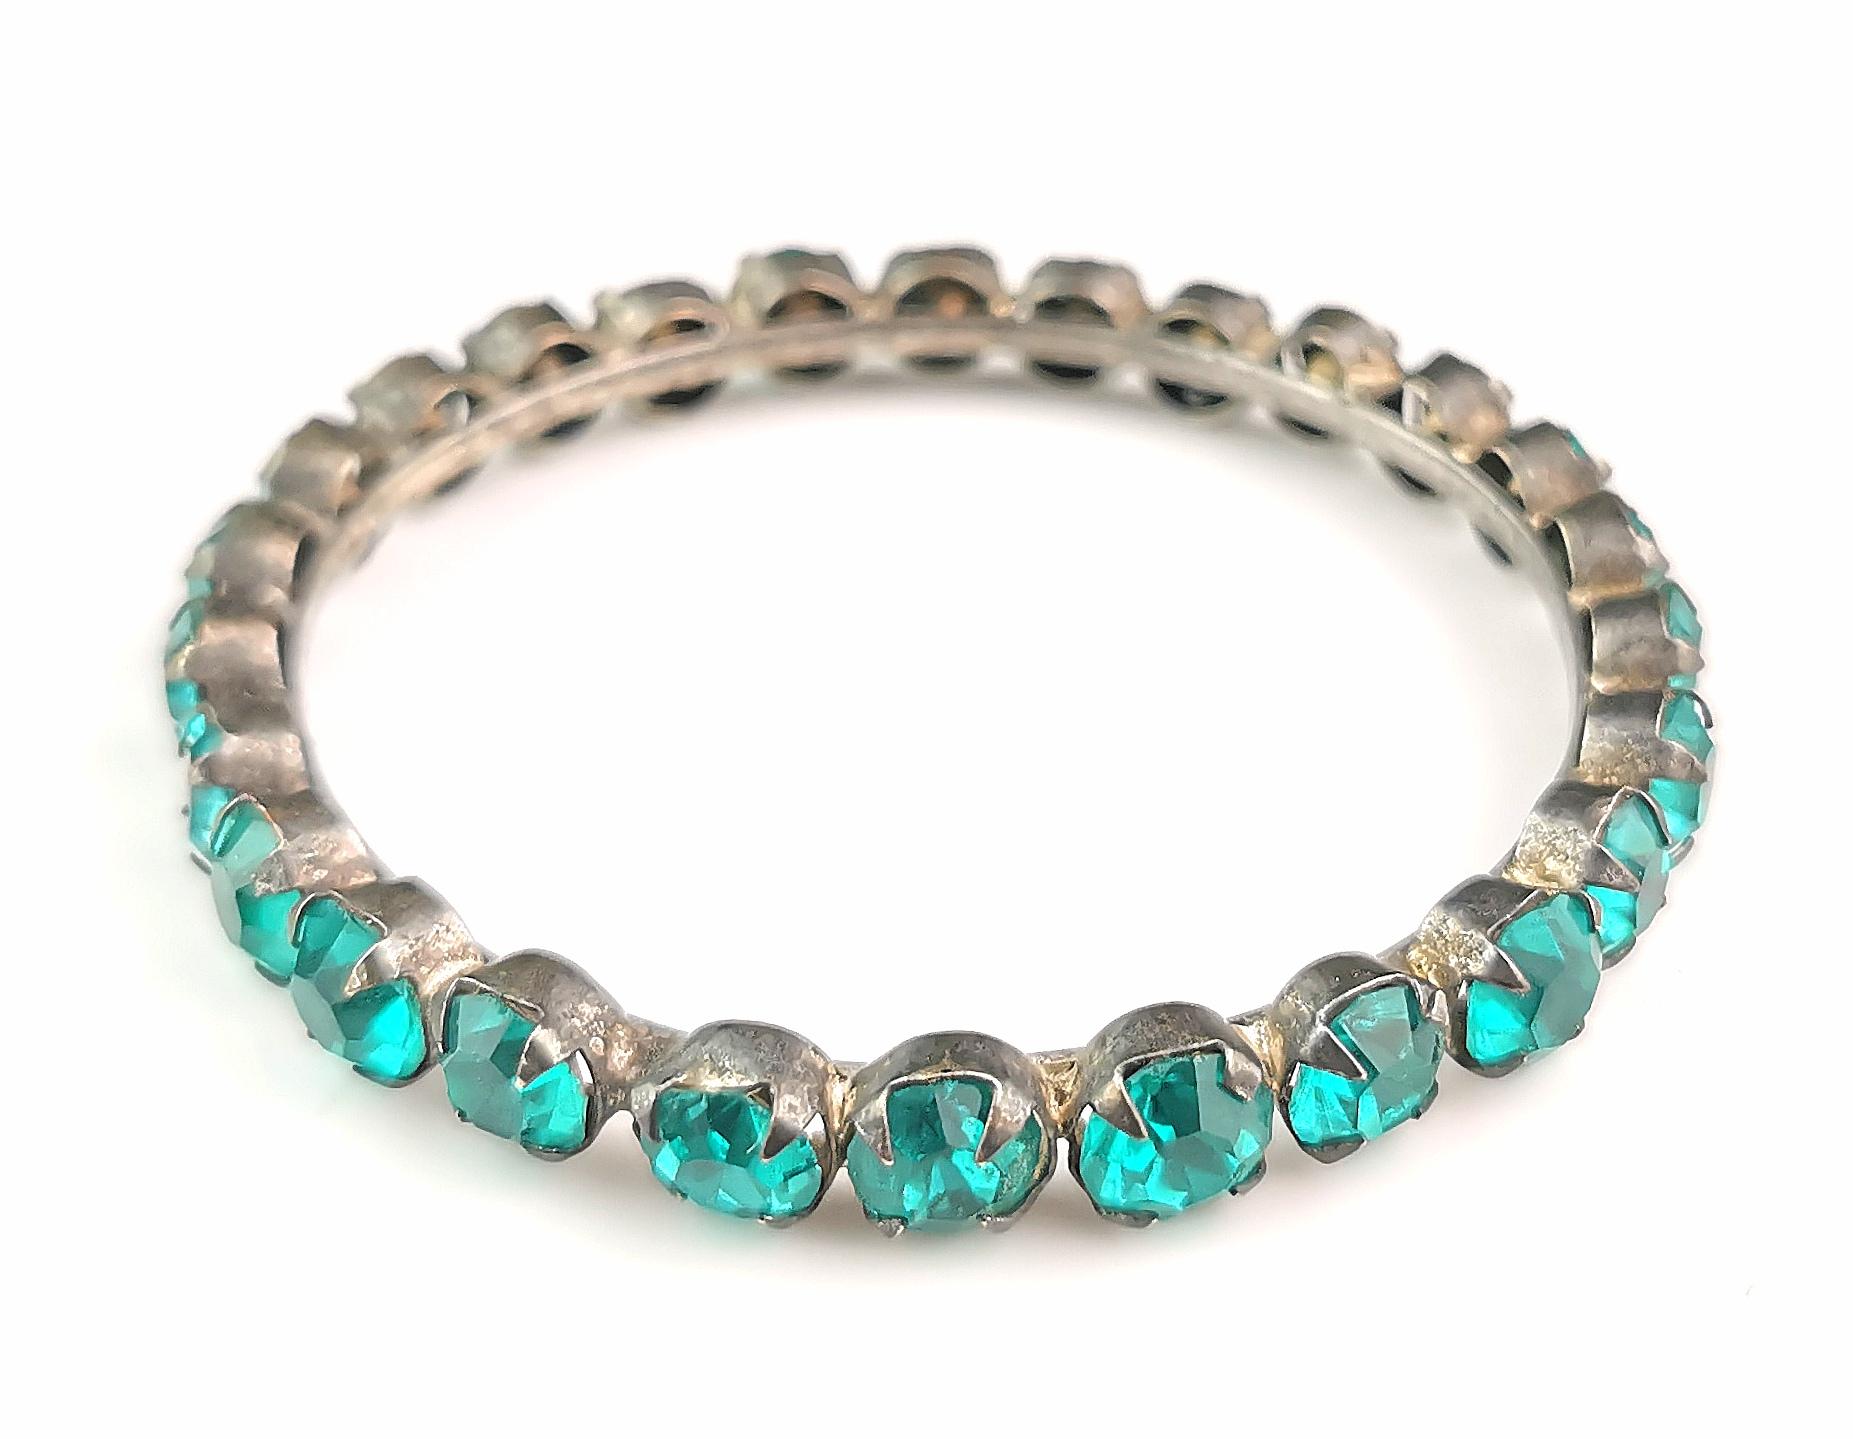 A gorgeous and striking vintage Art Deco era teal blue Paste bangle.

It is made from white metal and is a large size bangle, it is set all around the outside with lovely vibrant teal blue Paste stones, a lagoon blue with a tiny hint of green, they